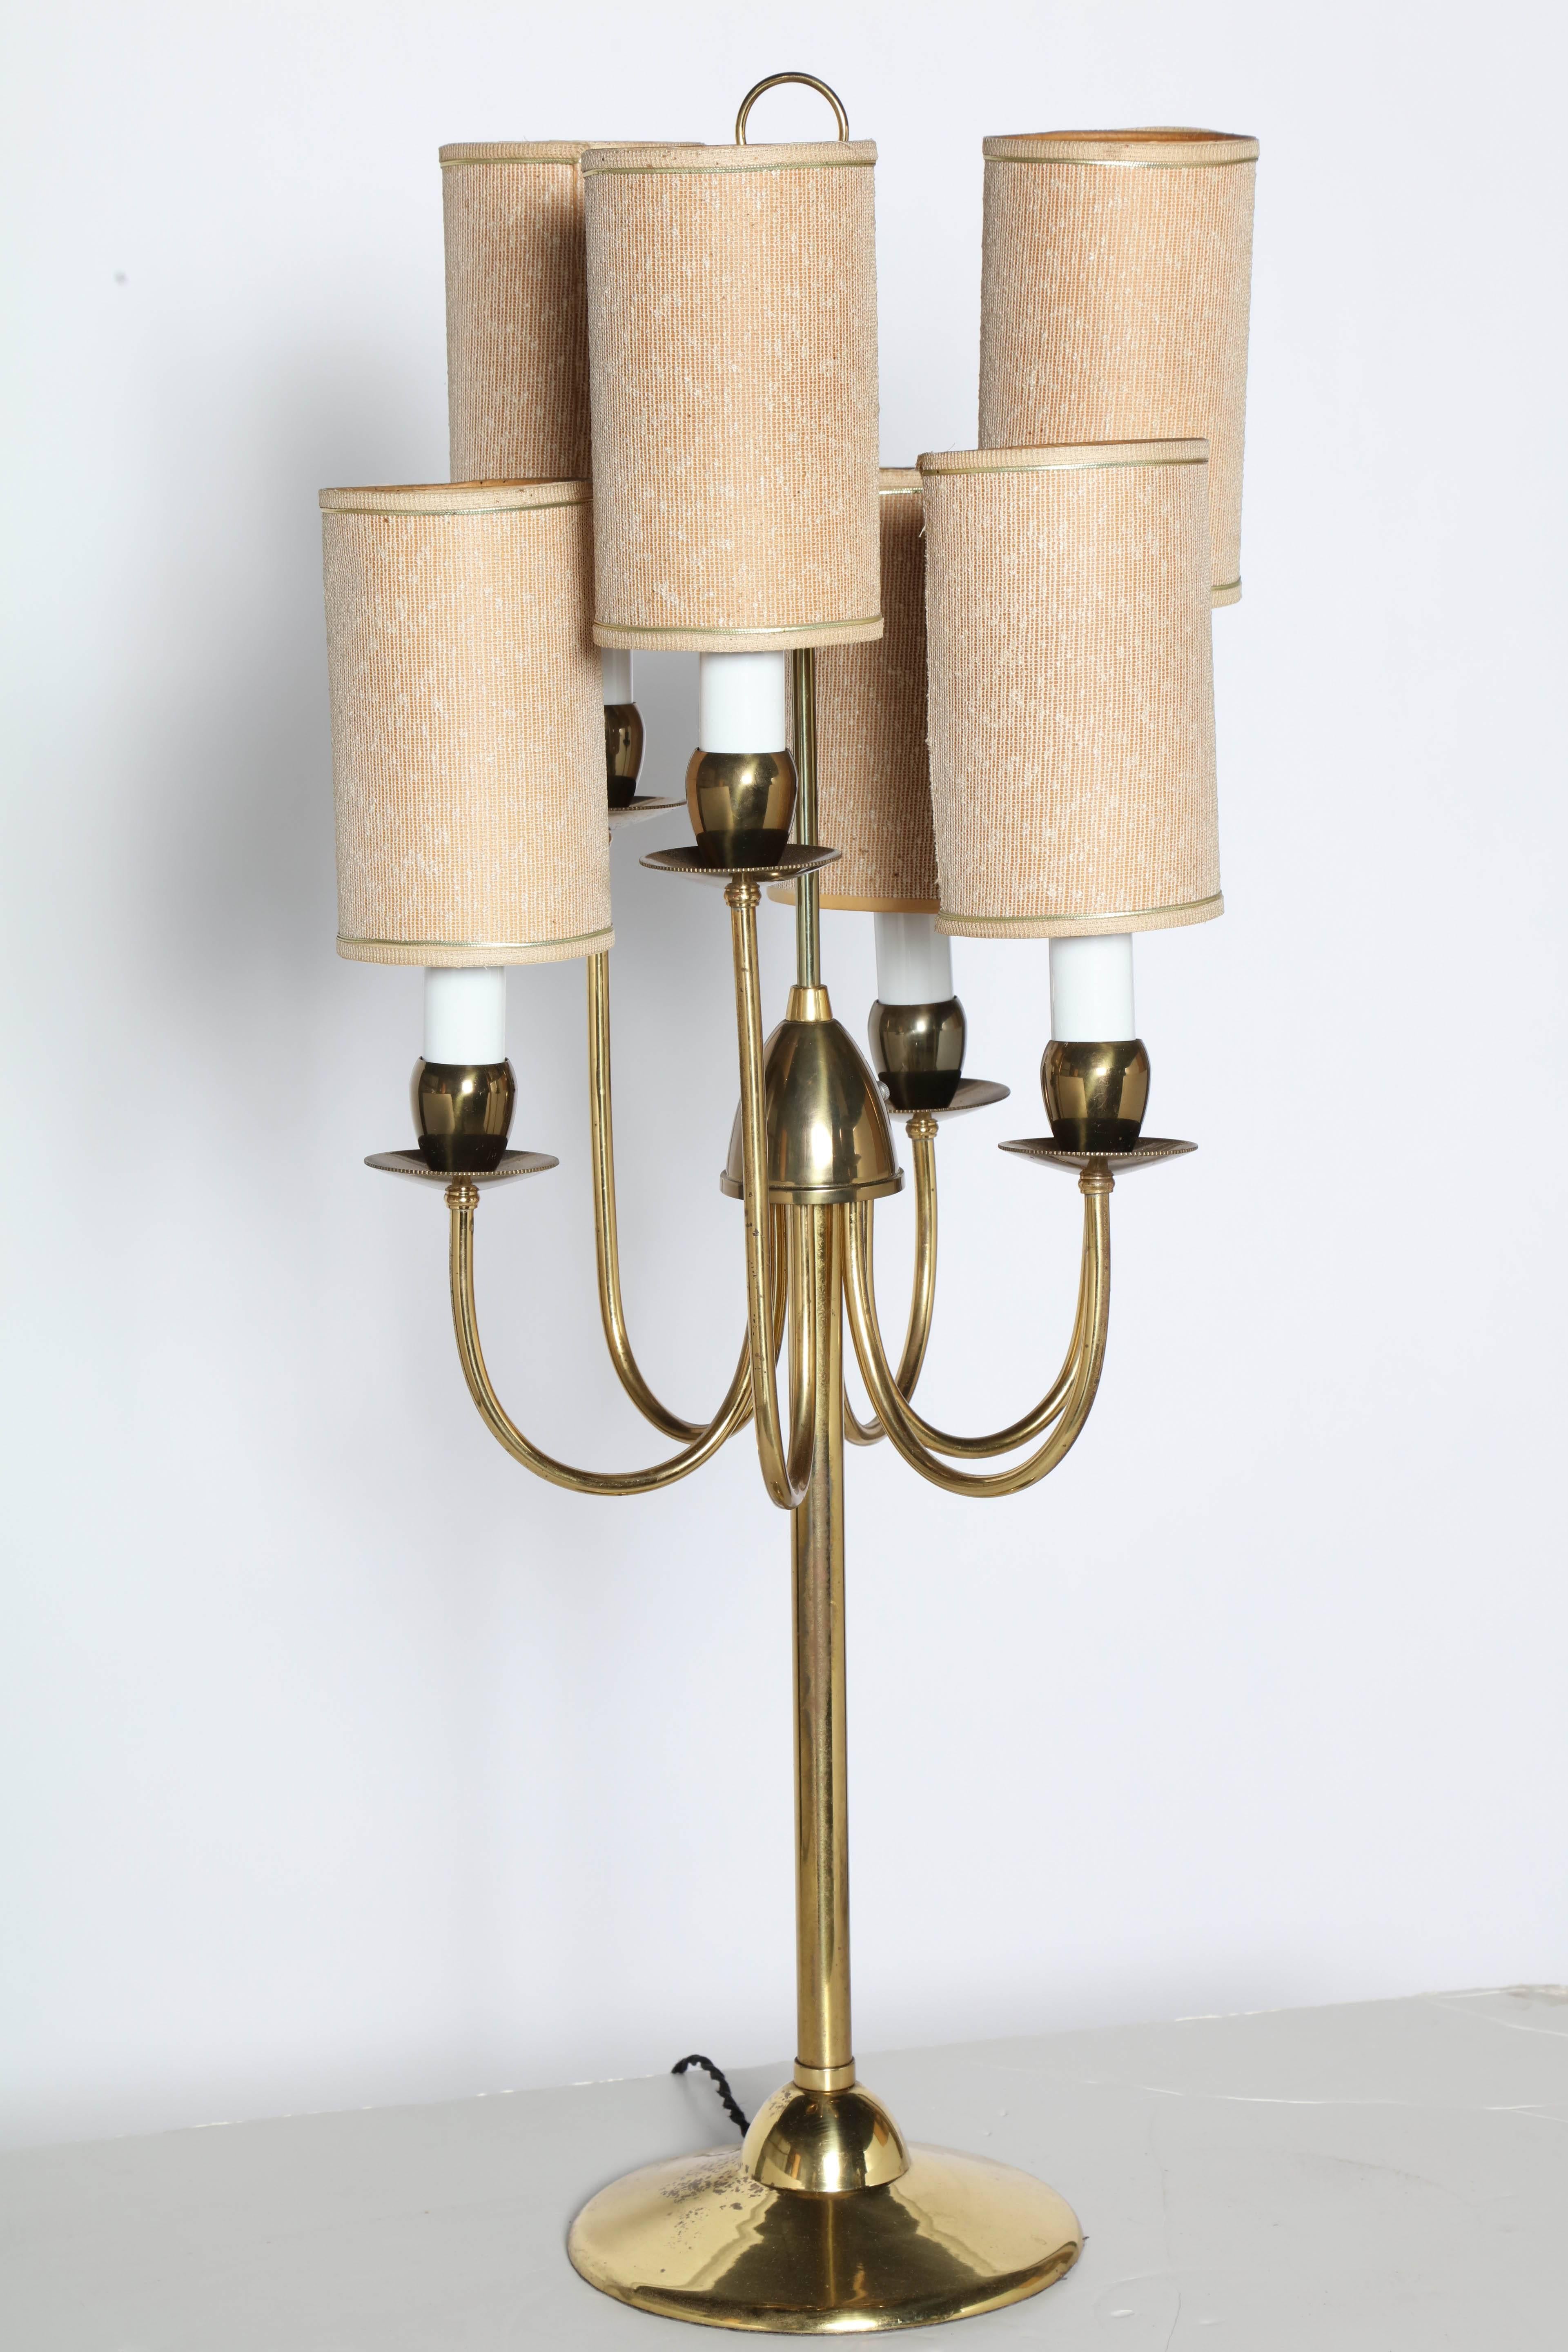 Majestic Two Tier Brass Six Candlestick Table Lamp in the manner of Tommi Parzinger, Circa 1960. Featuring six curved Brass arms, six Off-White candlesticks, six original cylindrical, woven fabric over paper, clip on Oatmeal Shades on a round